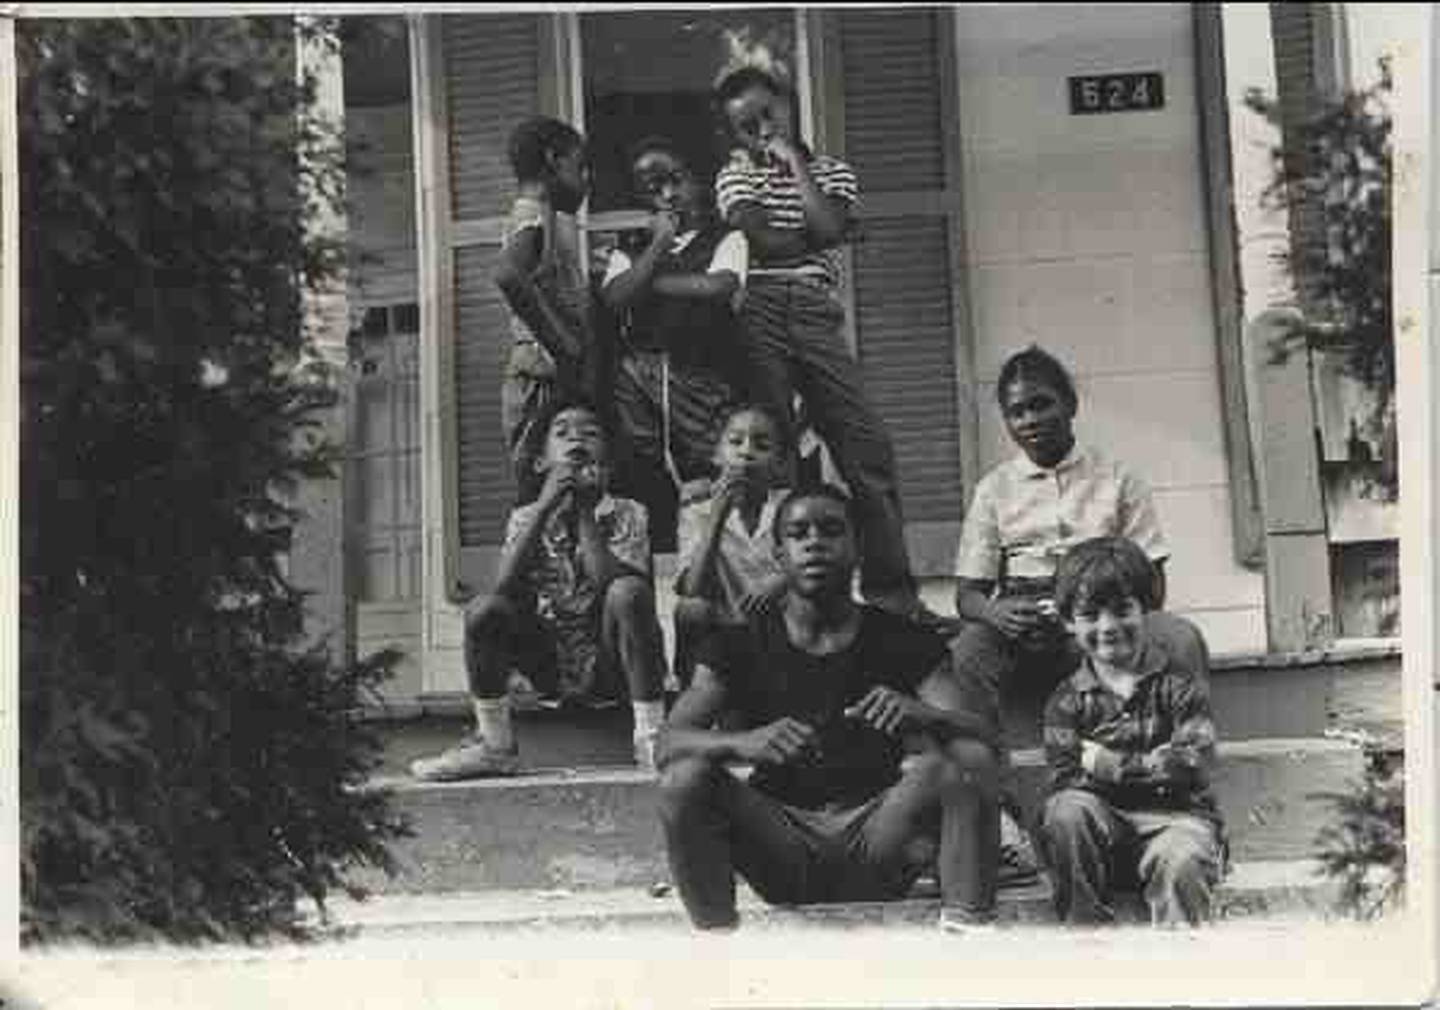 Sam Brand with a few neighborhood kids. He grew up in Baltimore, splitting time between the East and the South.